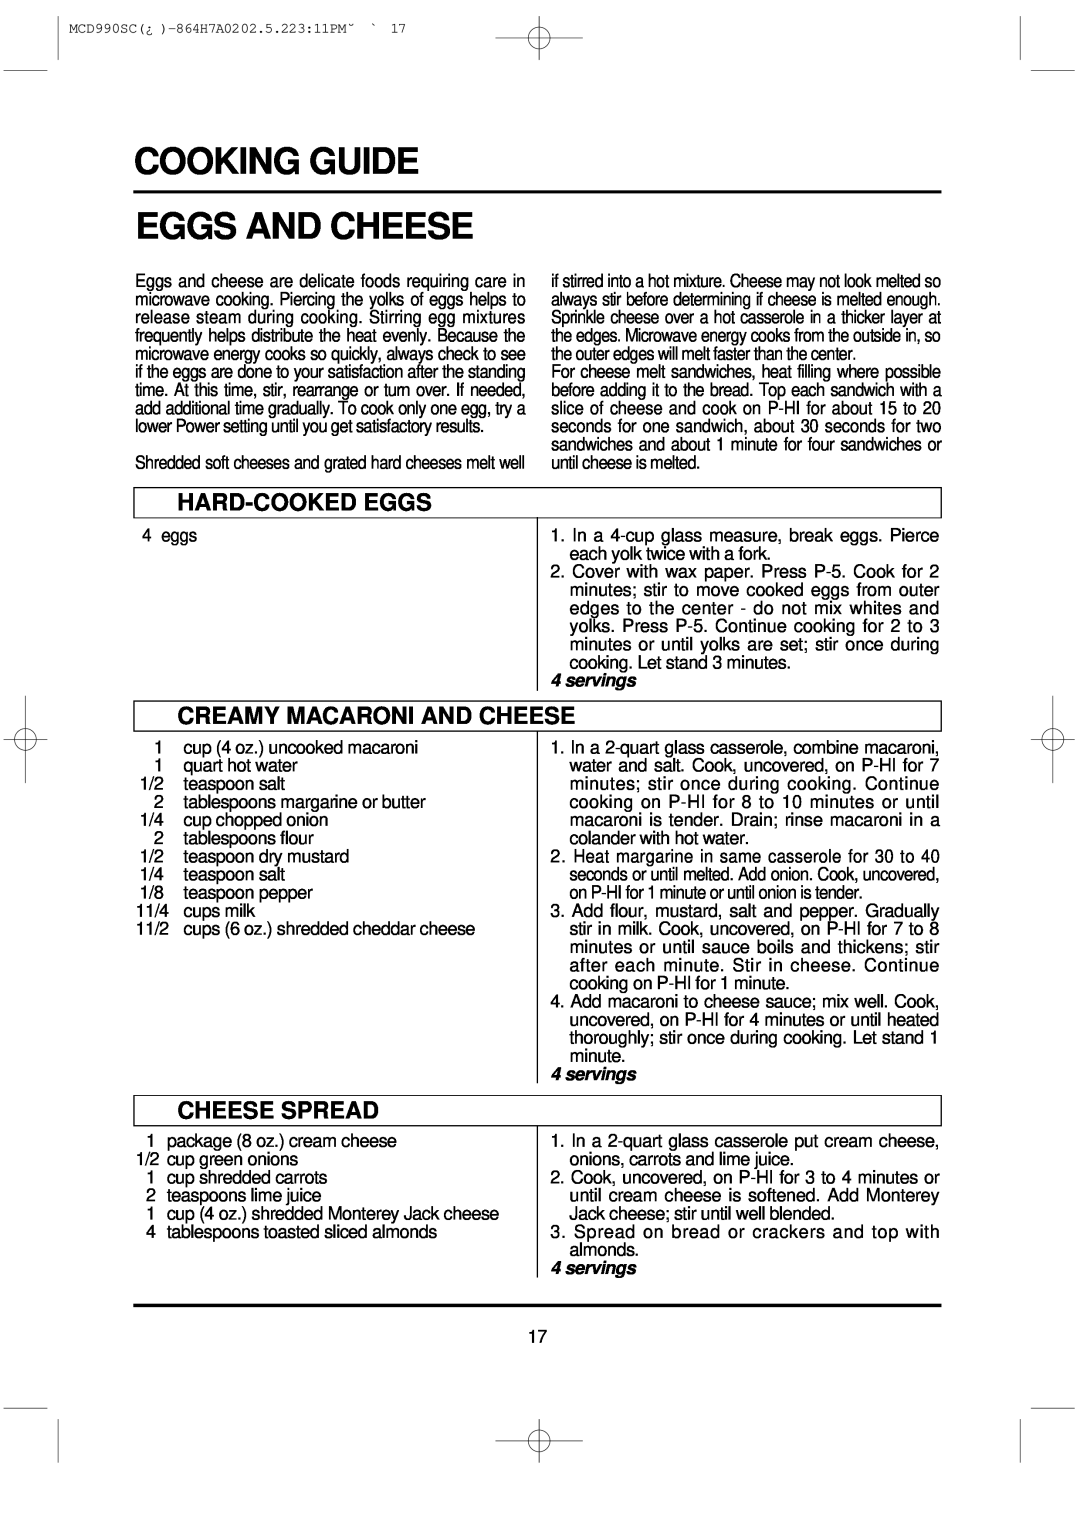 Magic Chef MCD990SC Cooking Guide Eggs And Cheese, Hard-Cookedeggs, Creamy Macaroni And Cheese, Cheese Spread, servings 